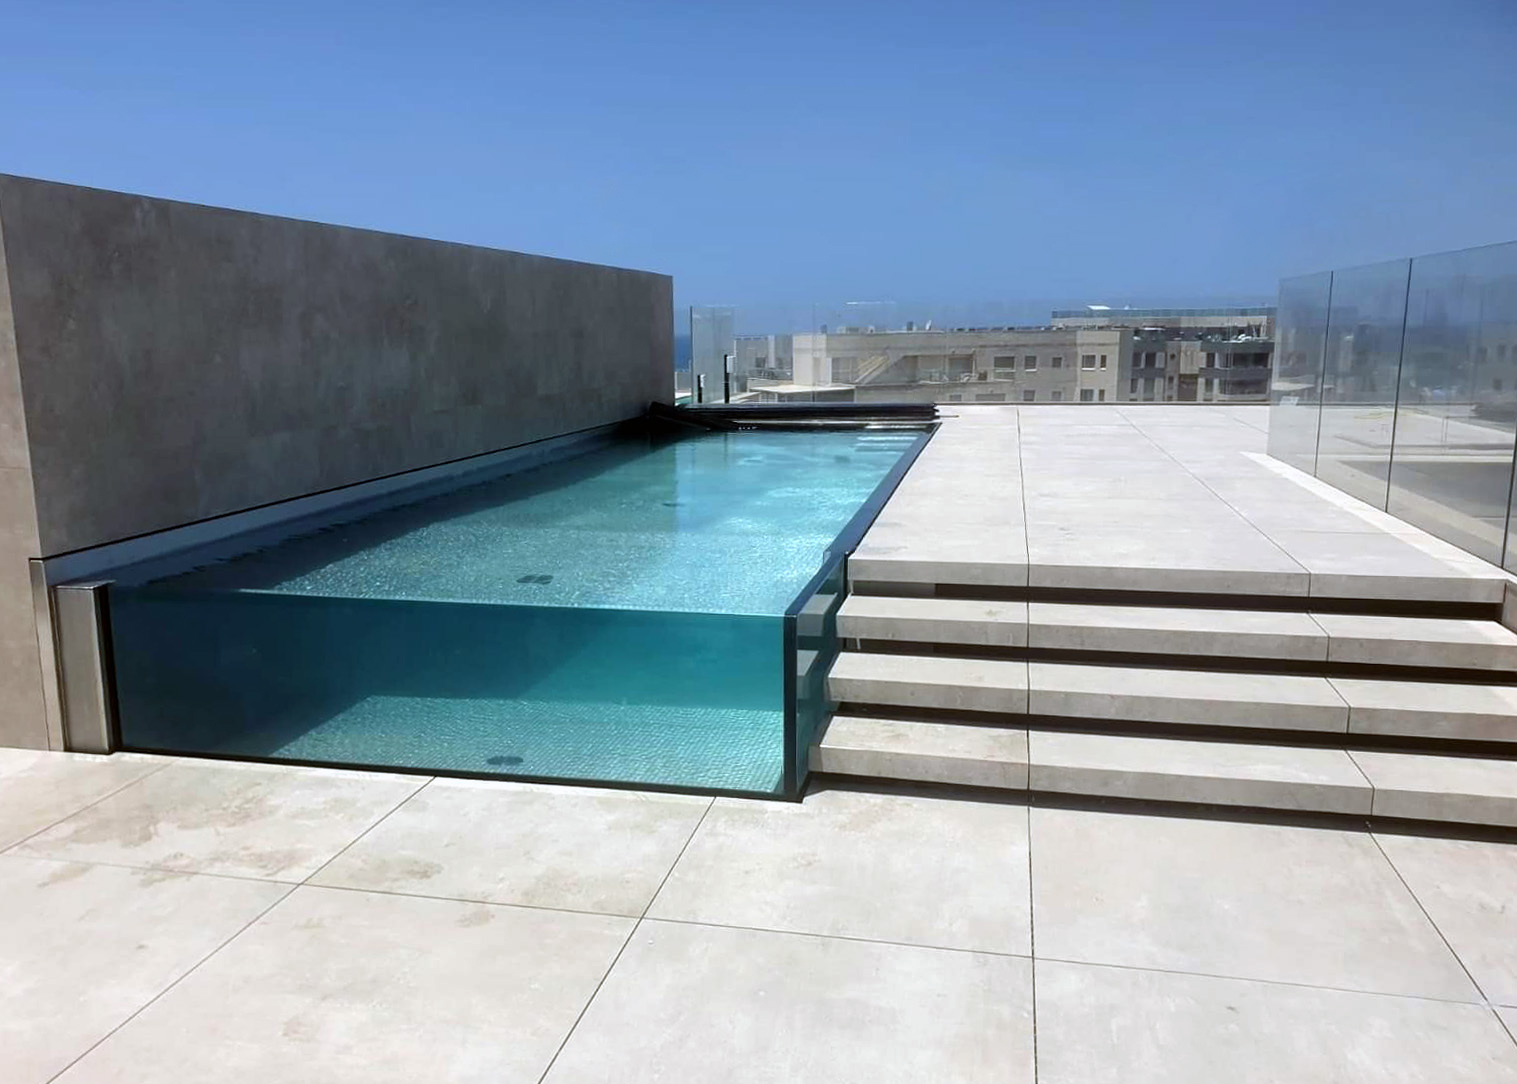 Luxury rooftop stainless-steel pool with glass walls by IMAGINOX